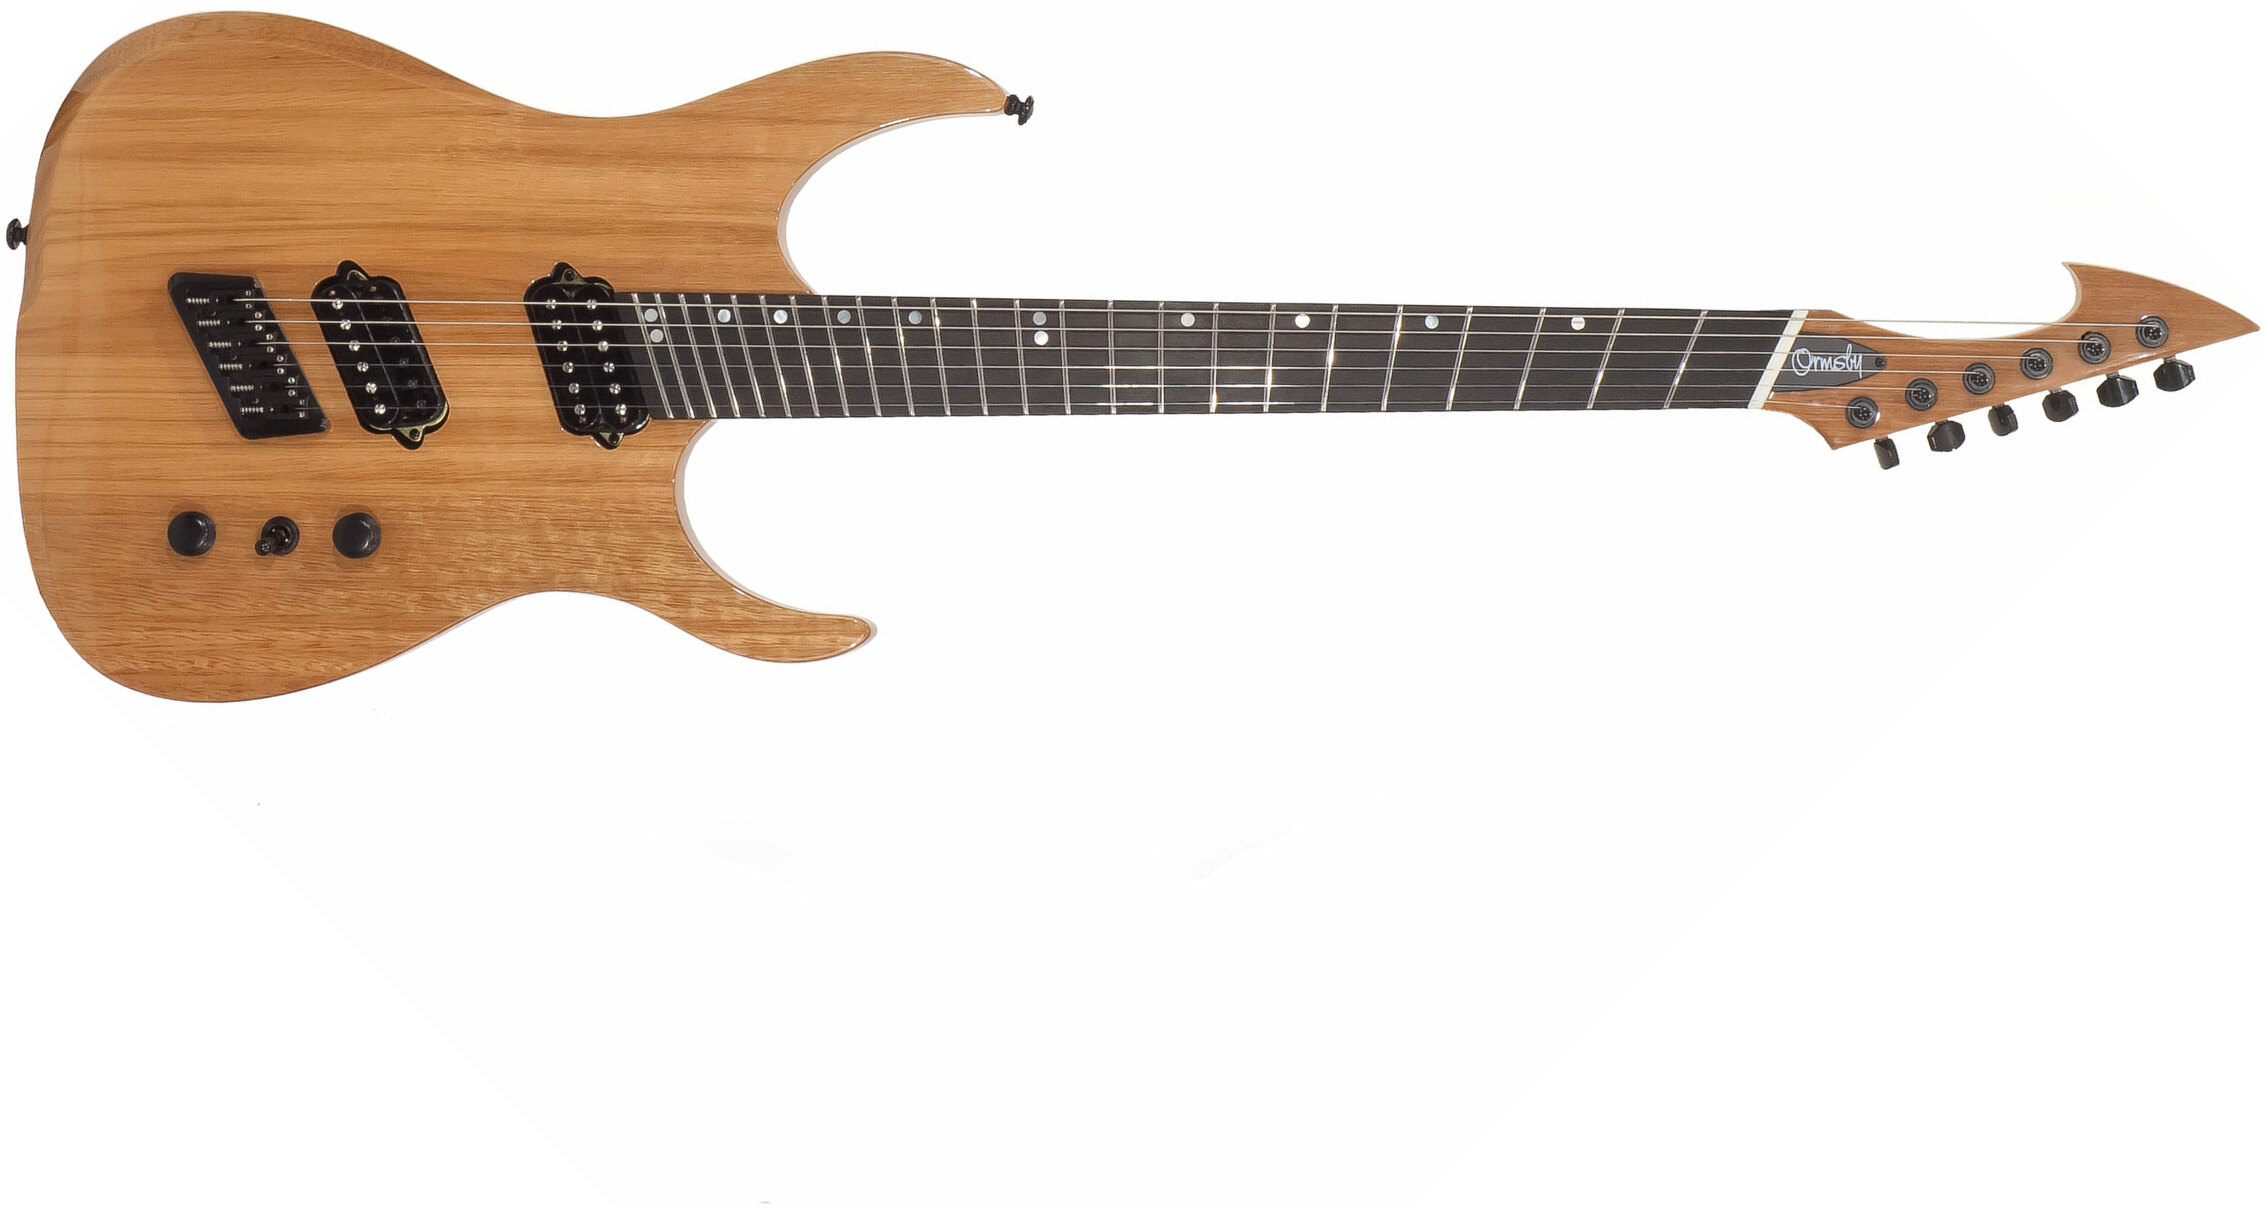 Ormsby Hype Gtr 6 Mahogany Hh Ht Eb - Natural - Guitare Électrique Multi-scale - Main picture